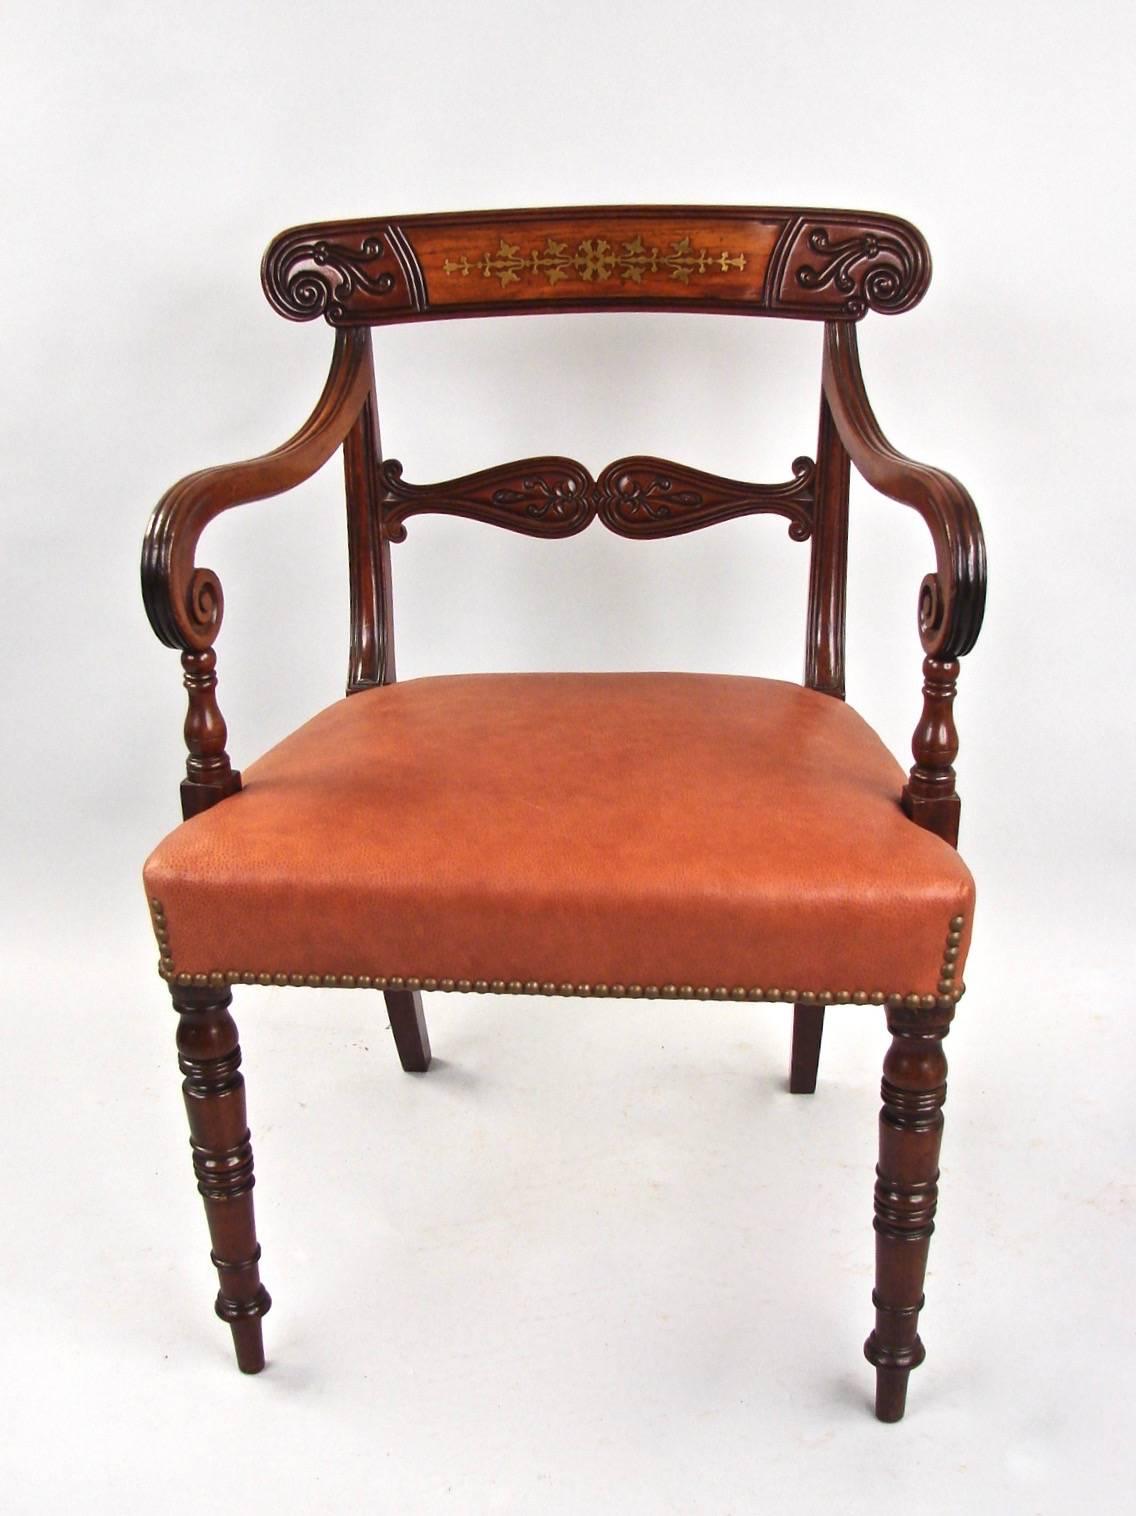 A fine set of eight Regency brass inlaid mahogany dining chairs consisting of two-arm and six side chairs, each with brass inlaid back splats with carved ears, over carved splats, the newly upholstered leather seats with nailhead trim supported on